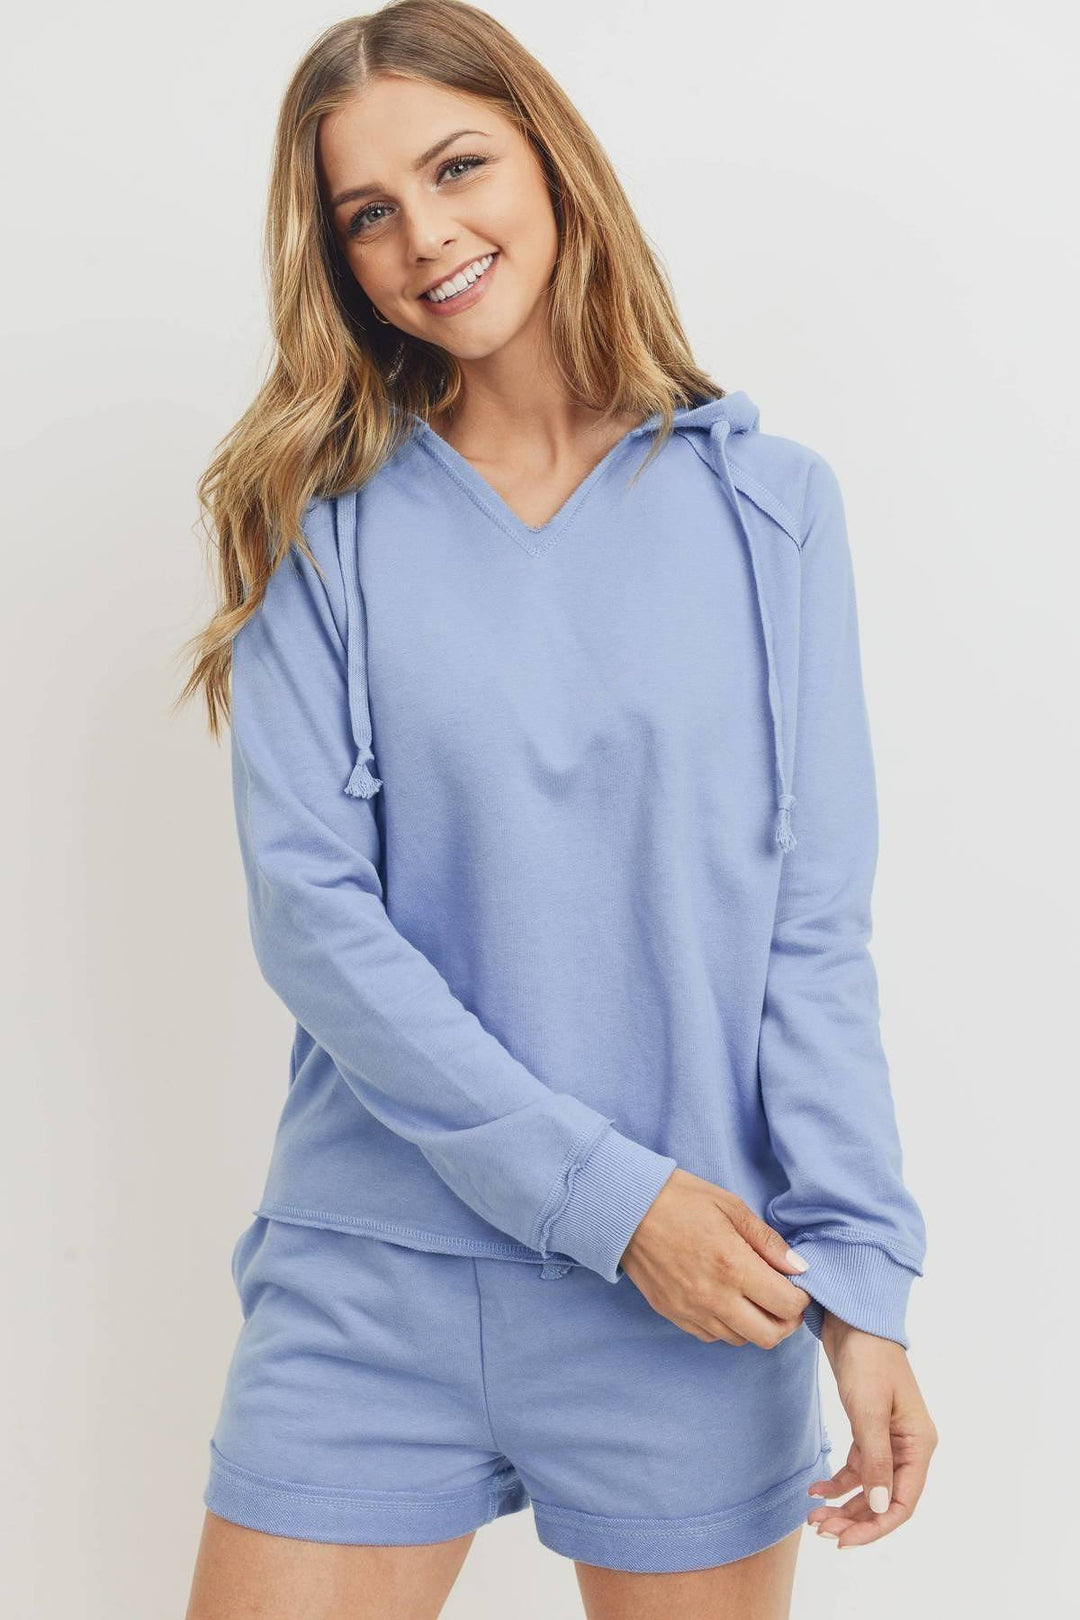 French Terry Hood With V-neck Long Sleeve Top for Women in Denim